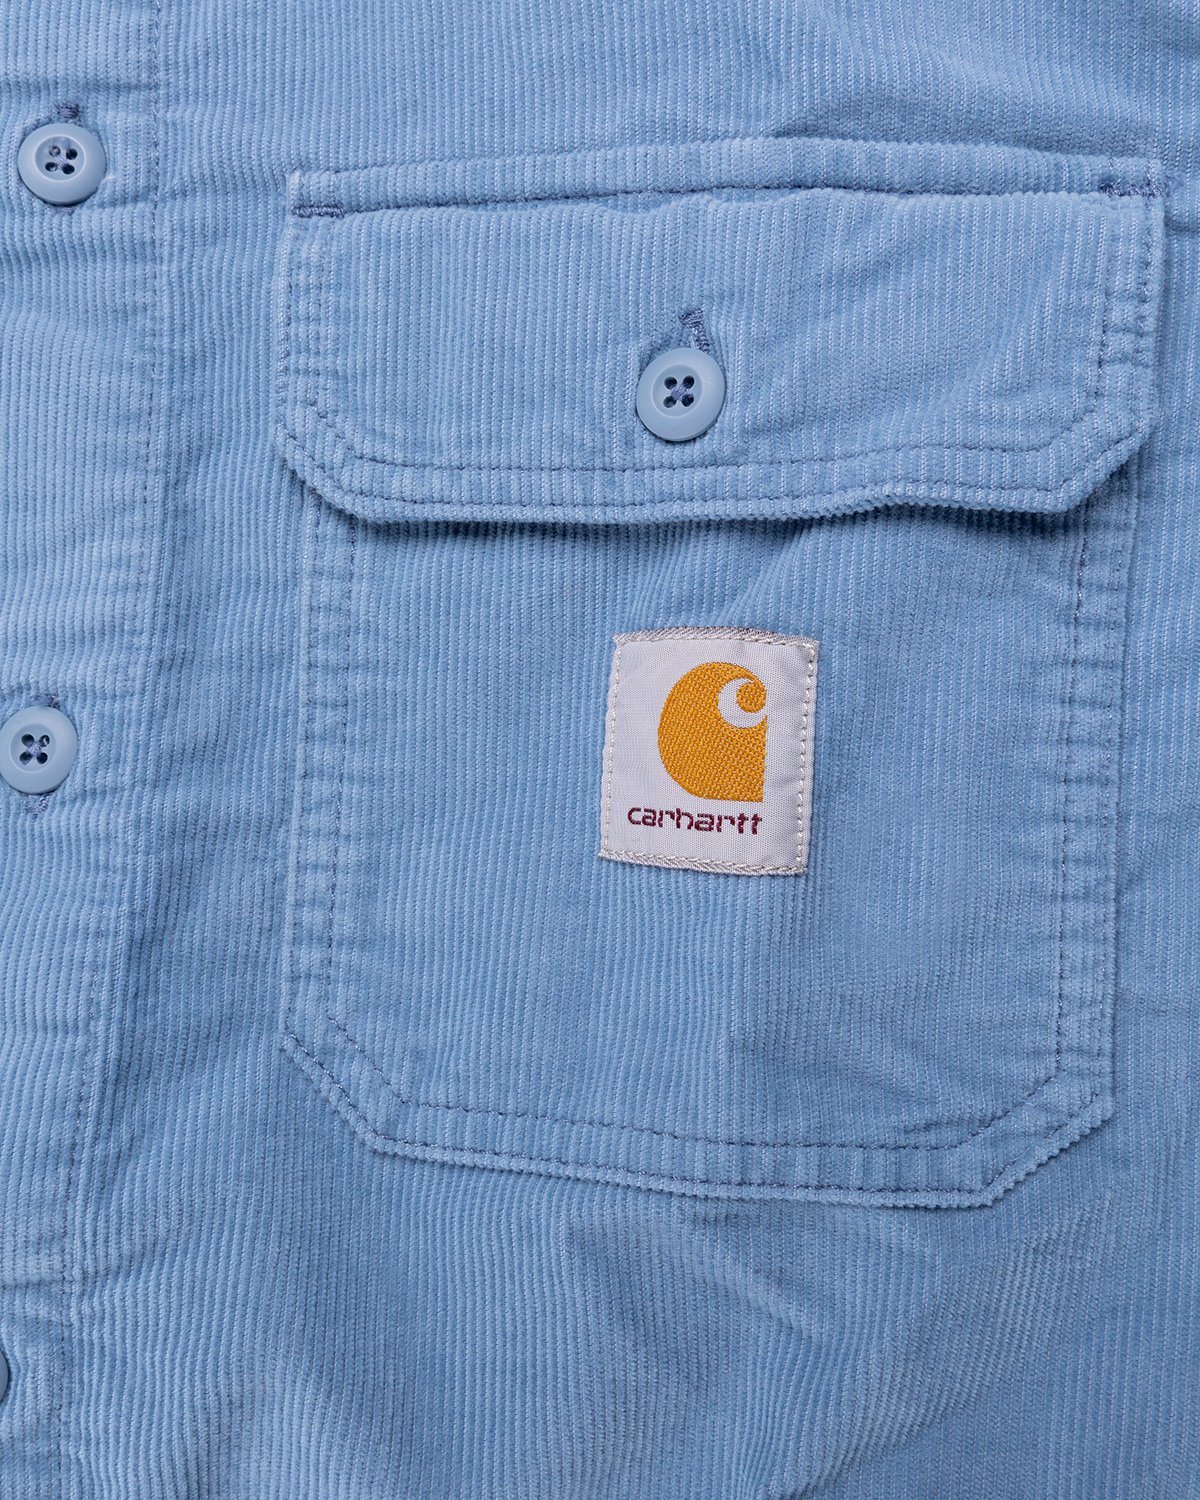 Carhartt WIP - Dixon Shirt Jacket Icy Water Rinsed - Clothing - Blue - Image 6